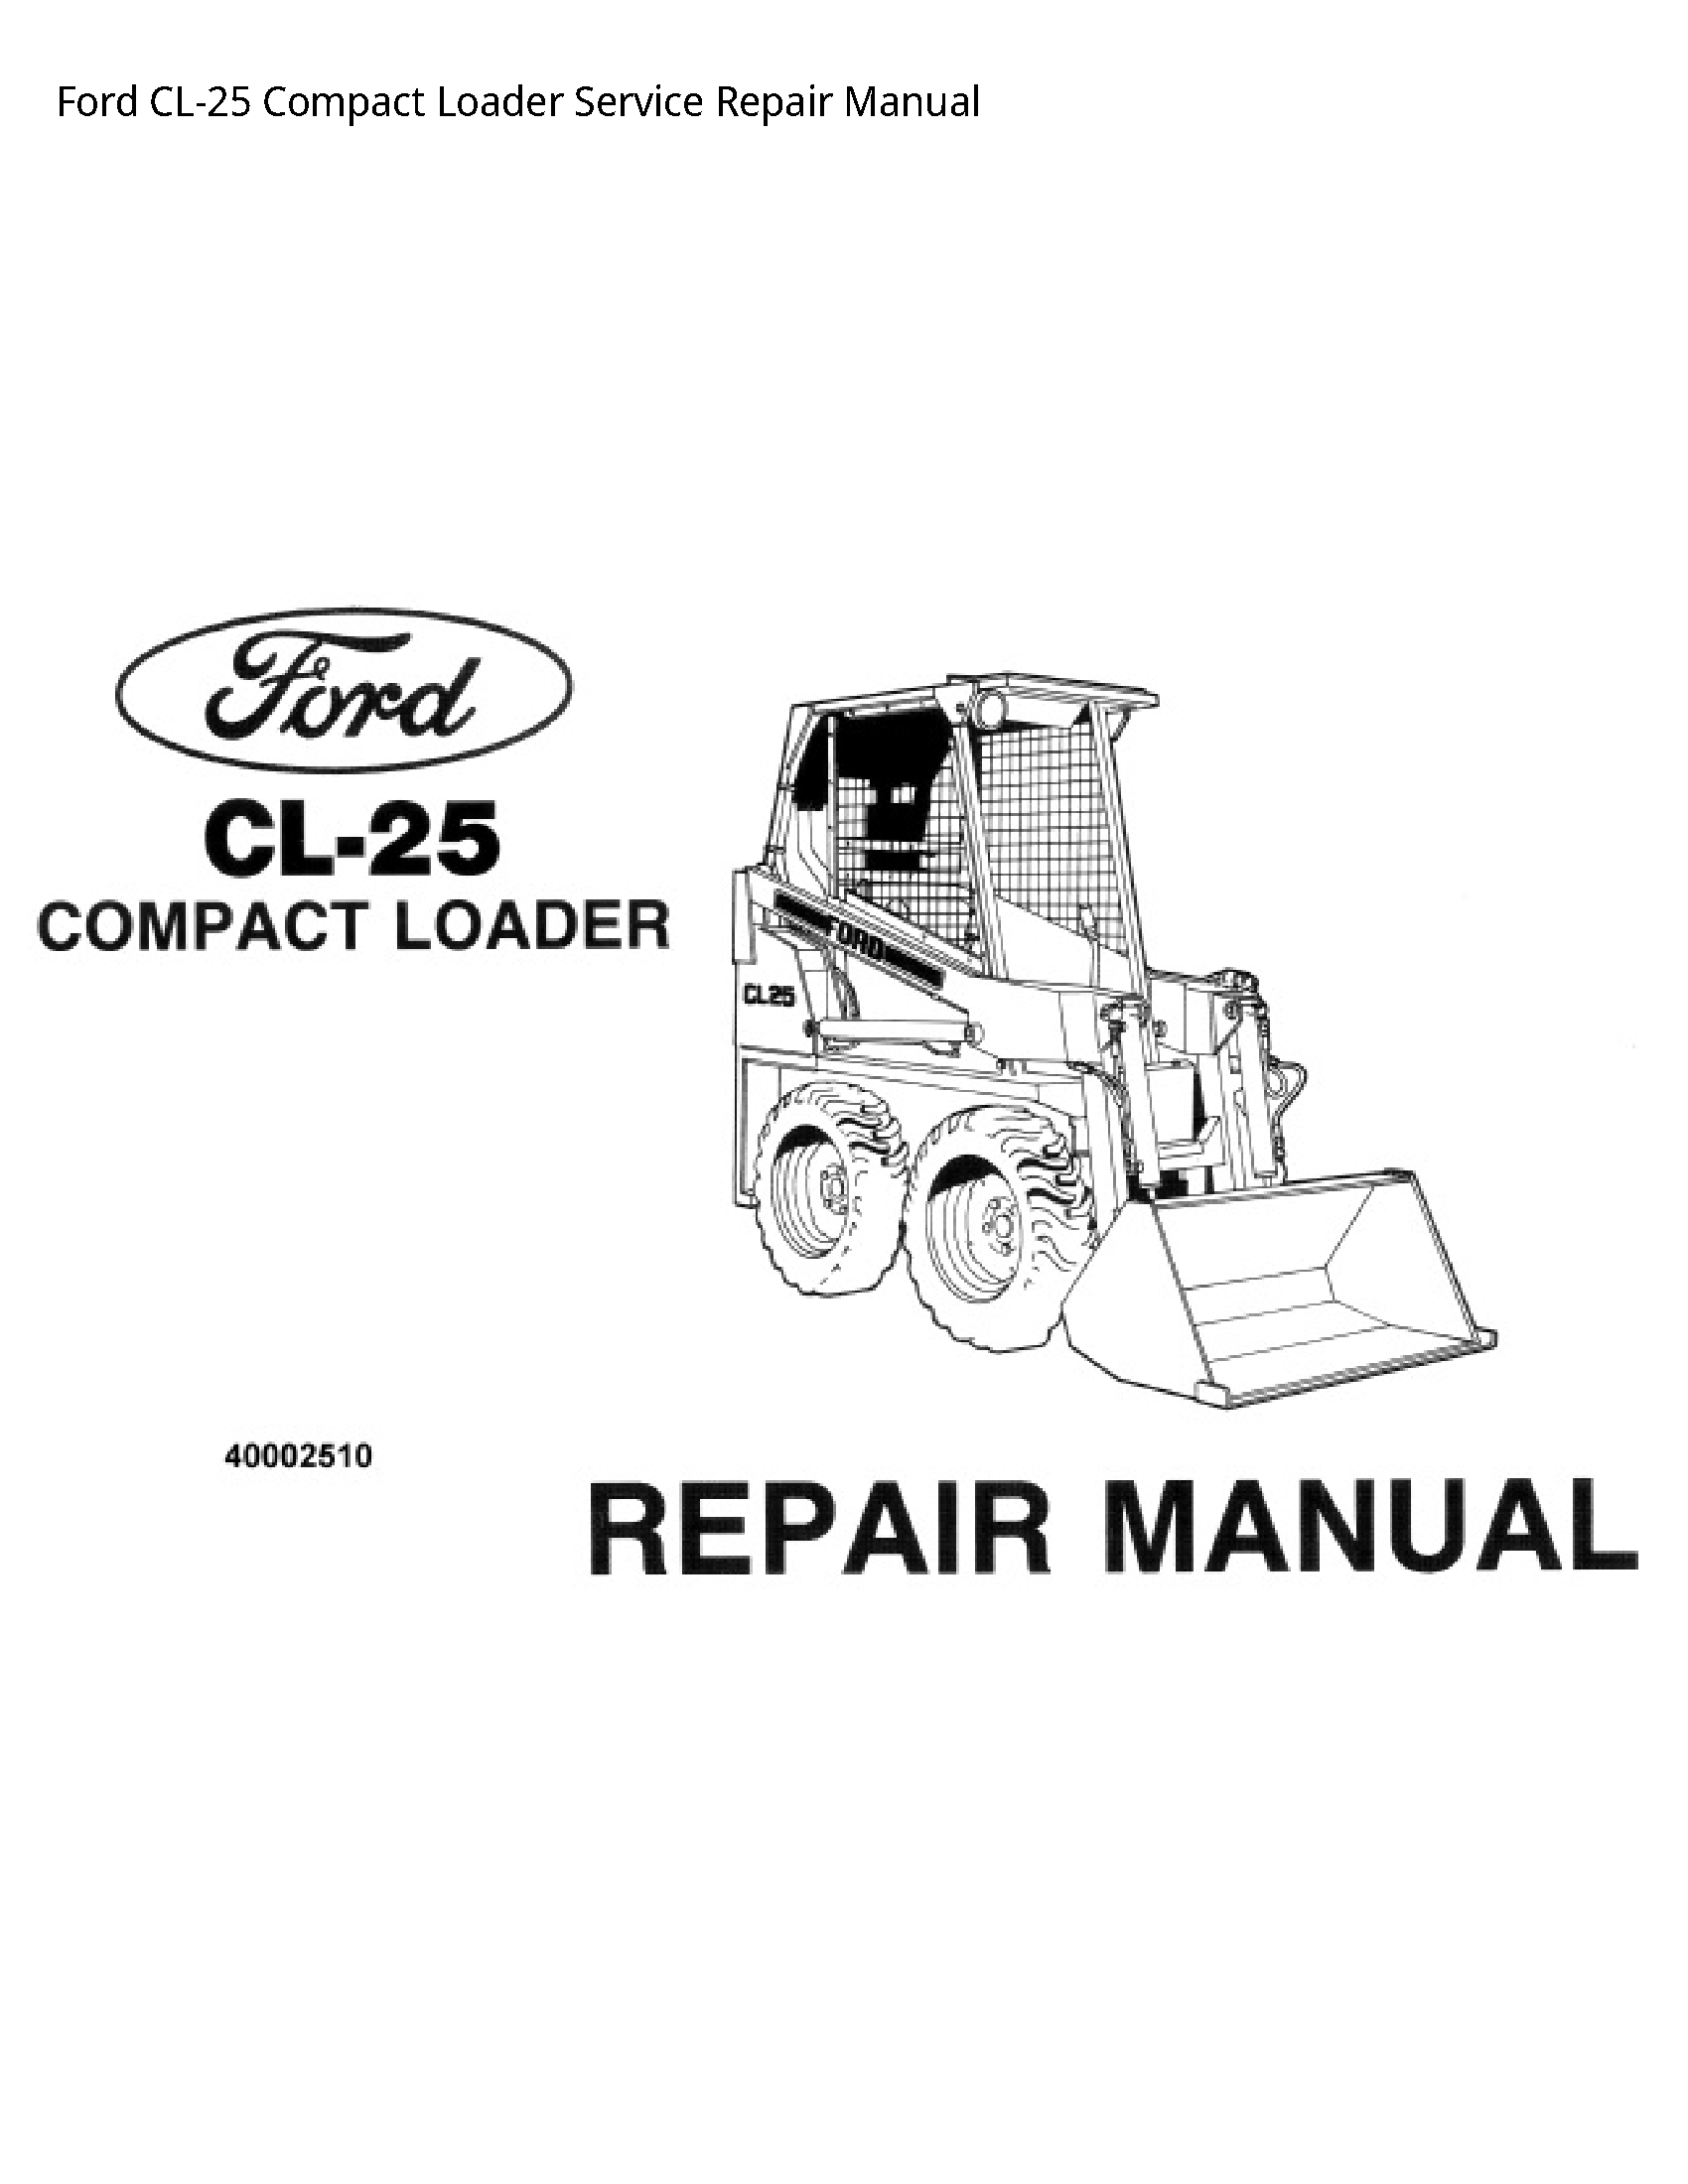 Ford CL-25 Compact Loader manual